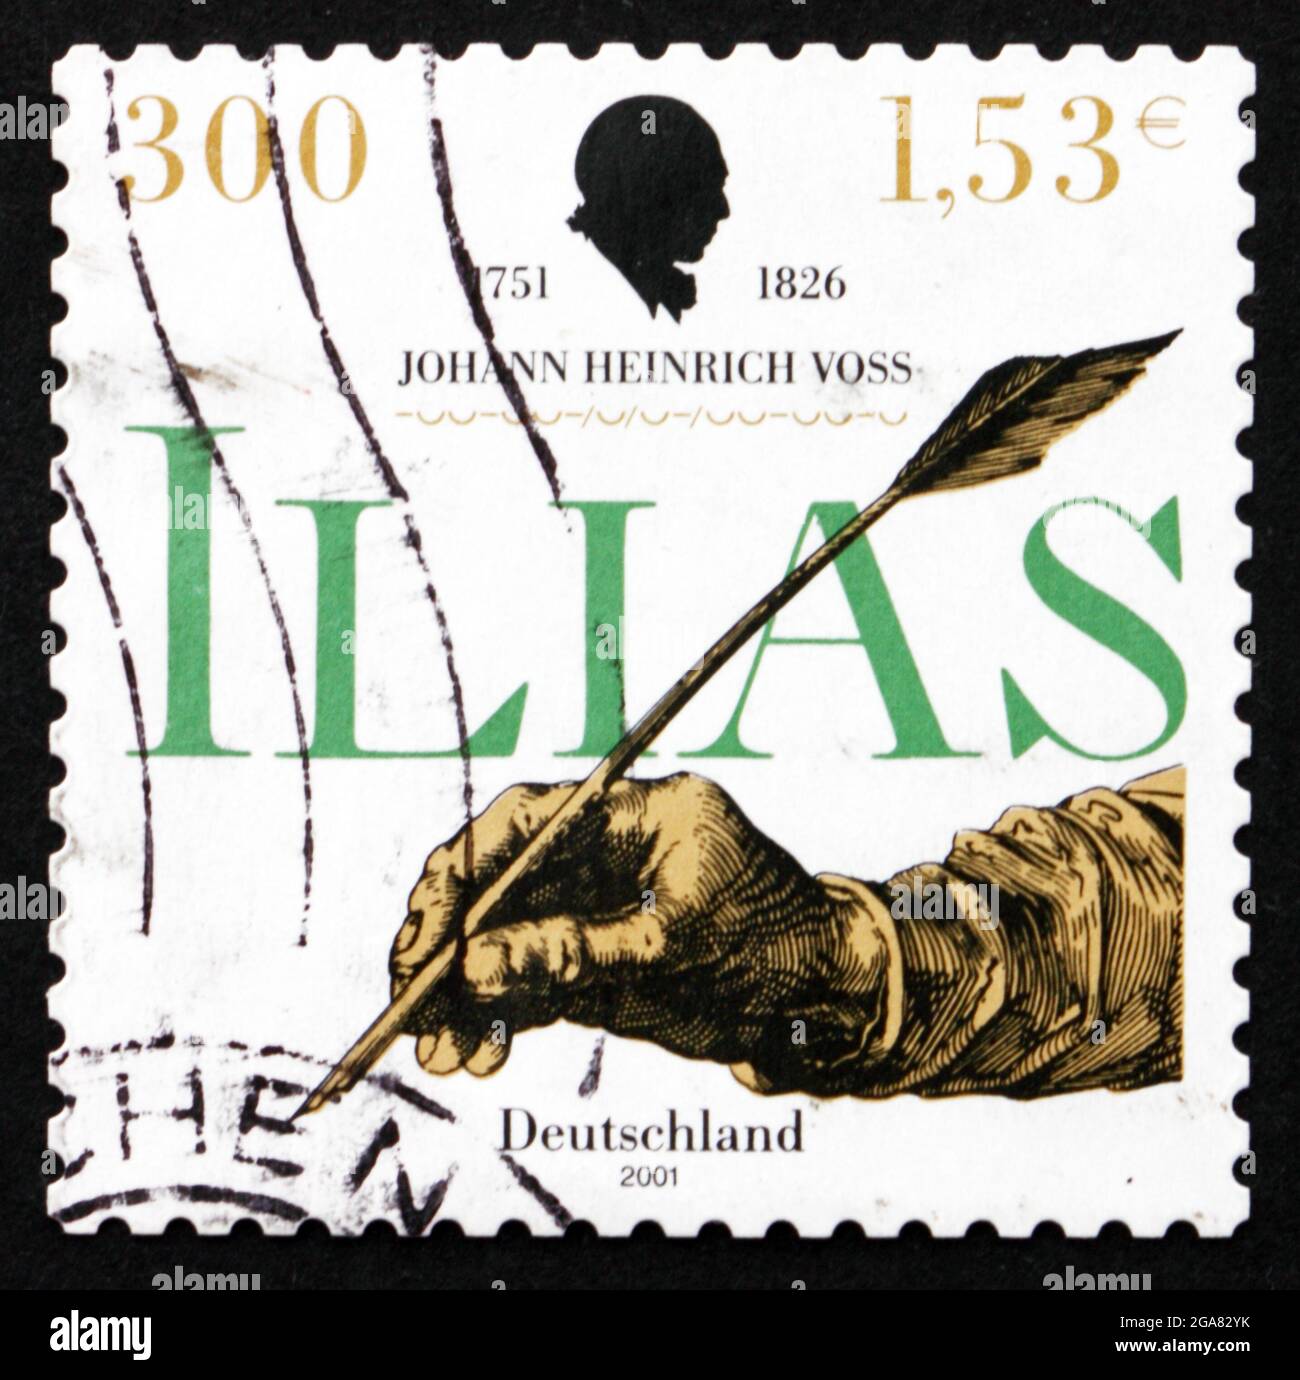 GERMANY - CIRCA 2001: a stamp printed in the Germany shows Johann Heinrich Voss, Poet and Translator of Greek Classics, circa 2001 Stock Photo